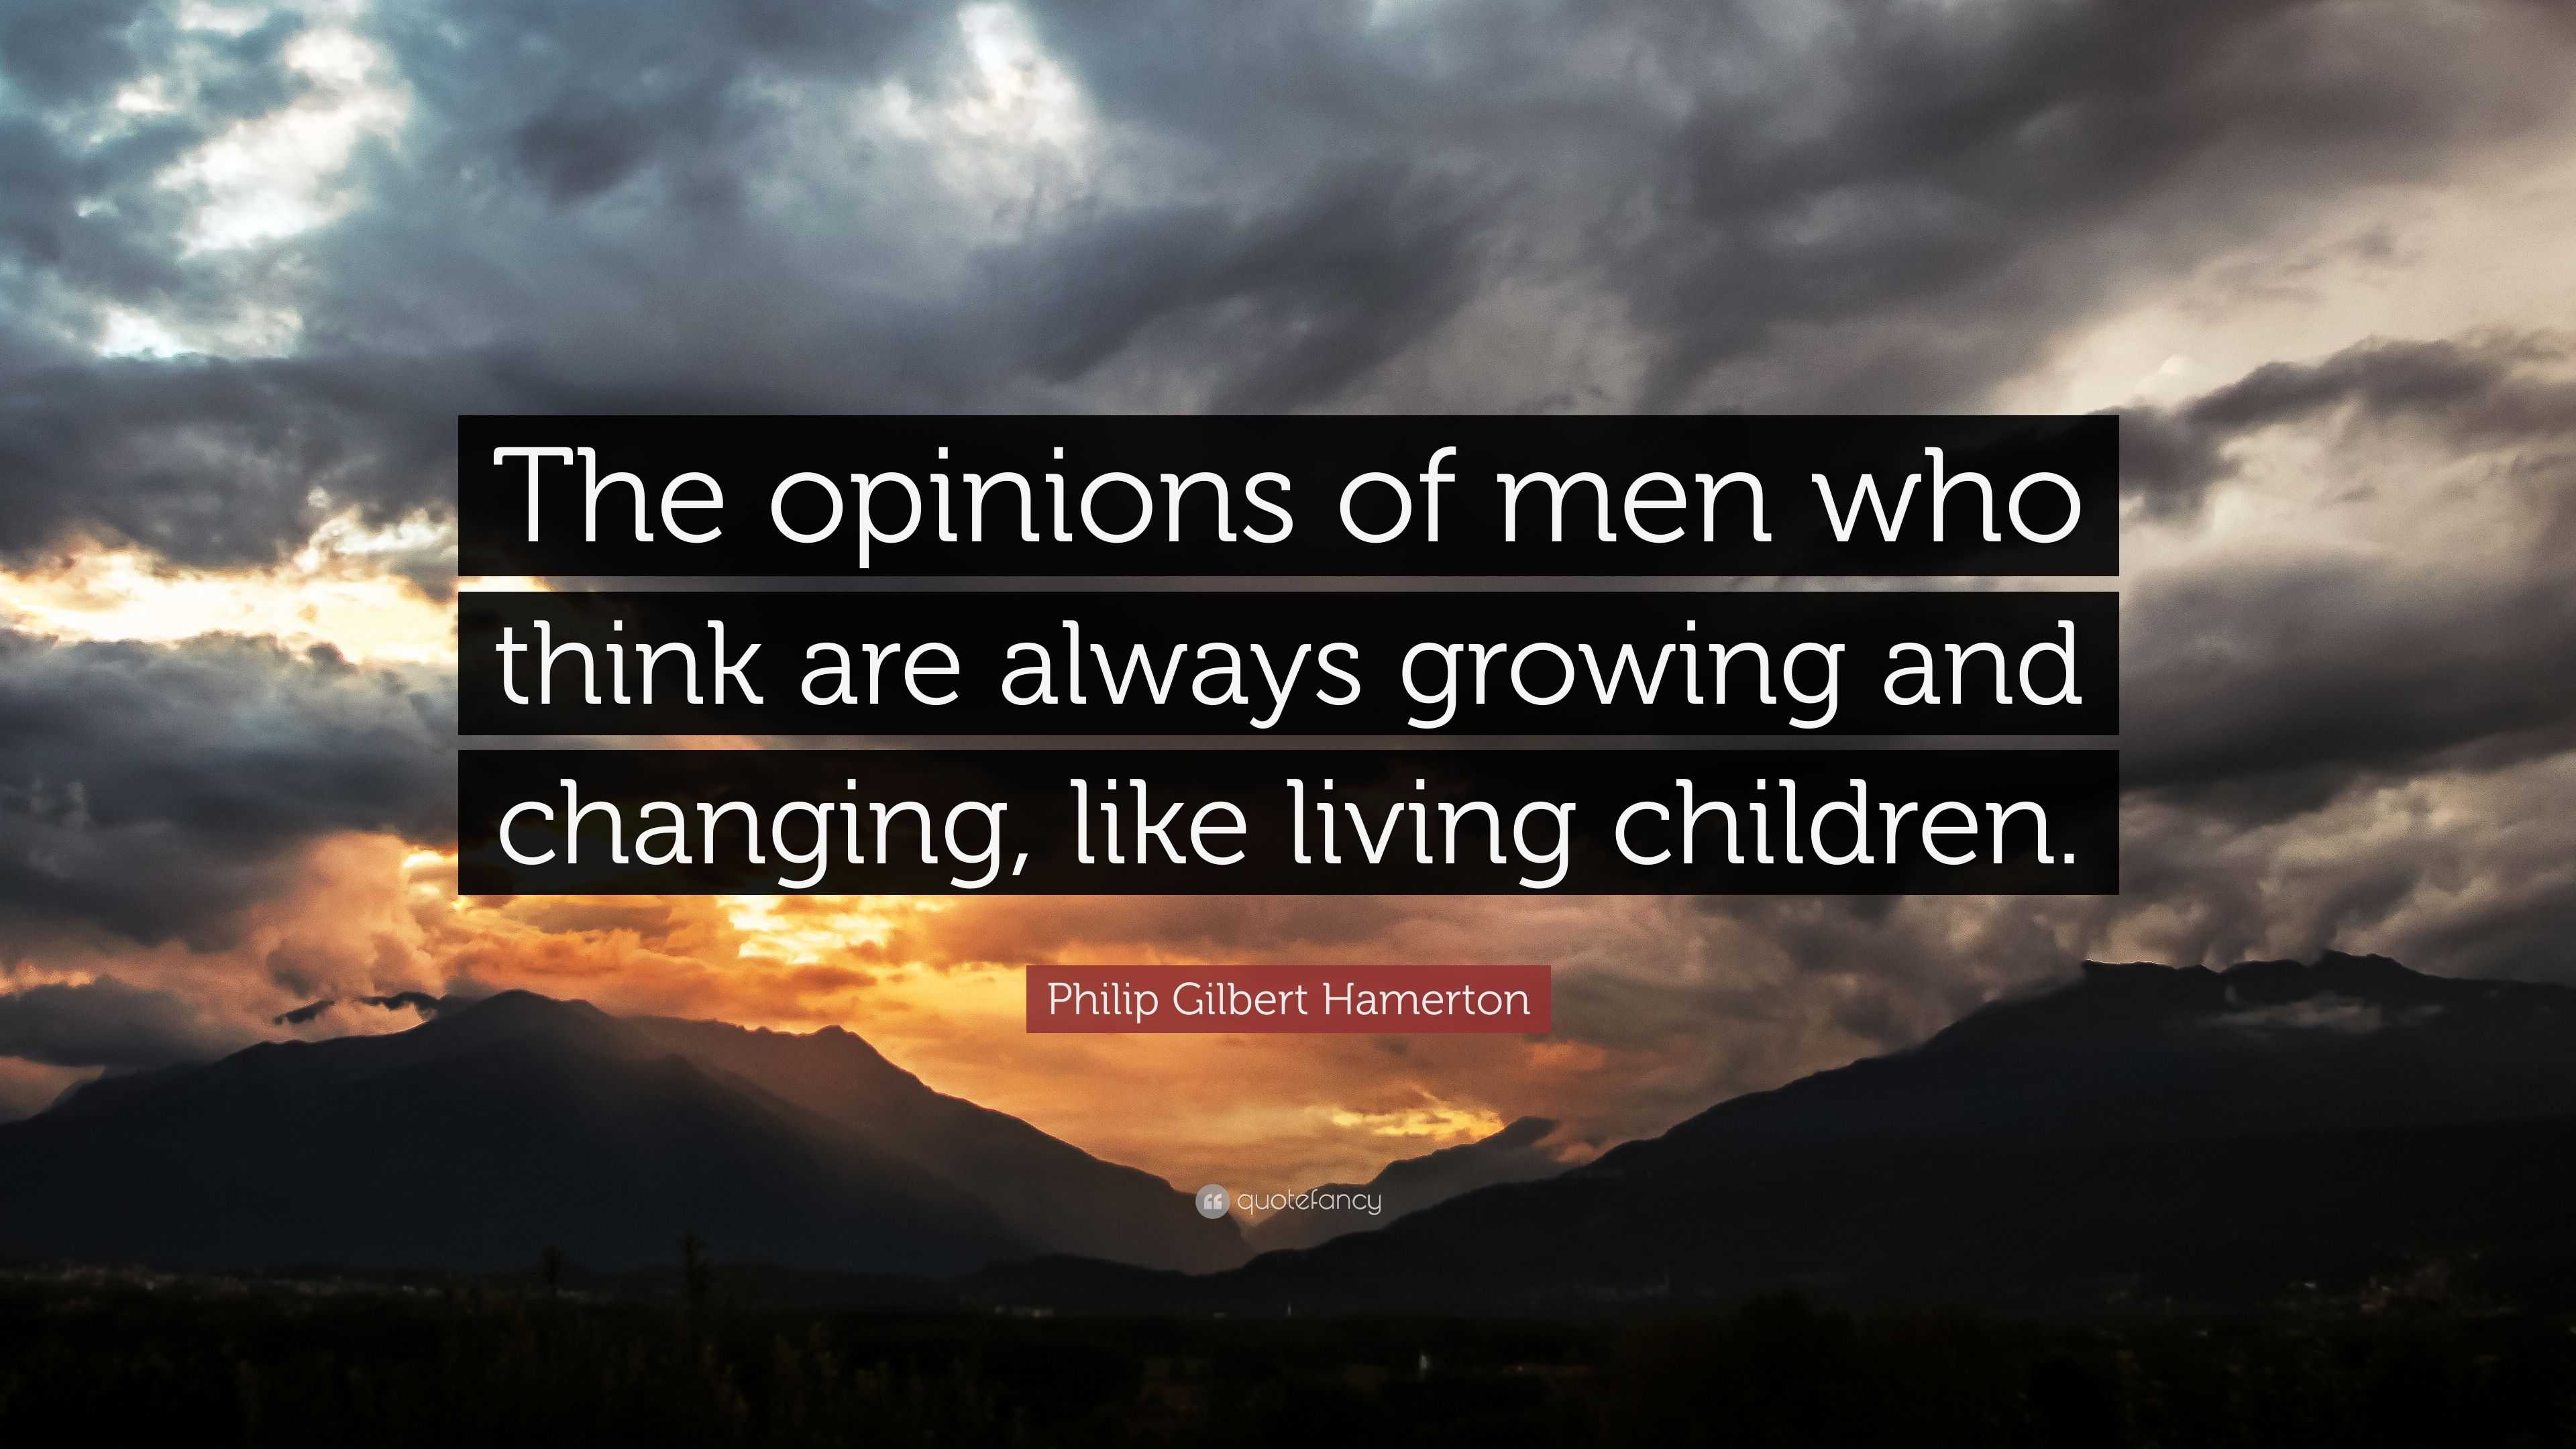 Philip Gilbert Hamerton Quote: “The opinions of men who think are always growing and changing, like living children.” (7 wallpapers) - Quotefancy